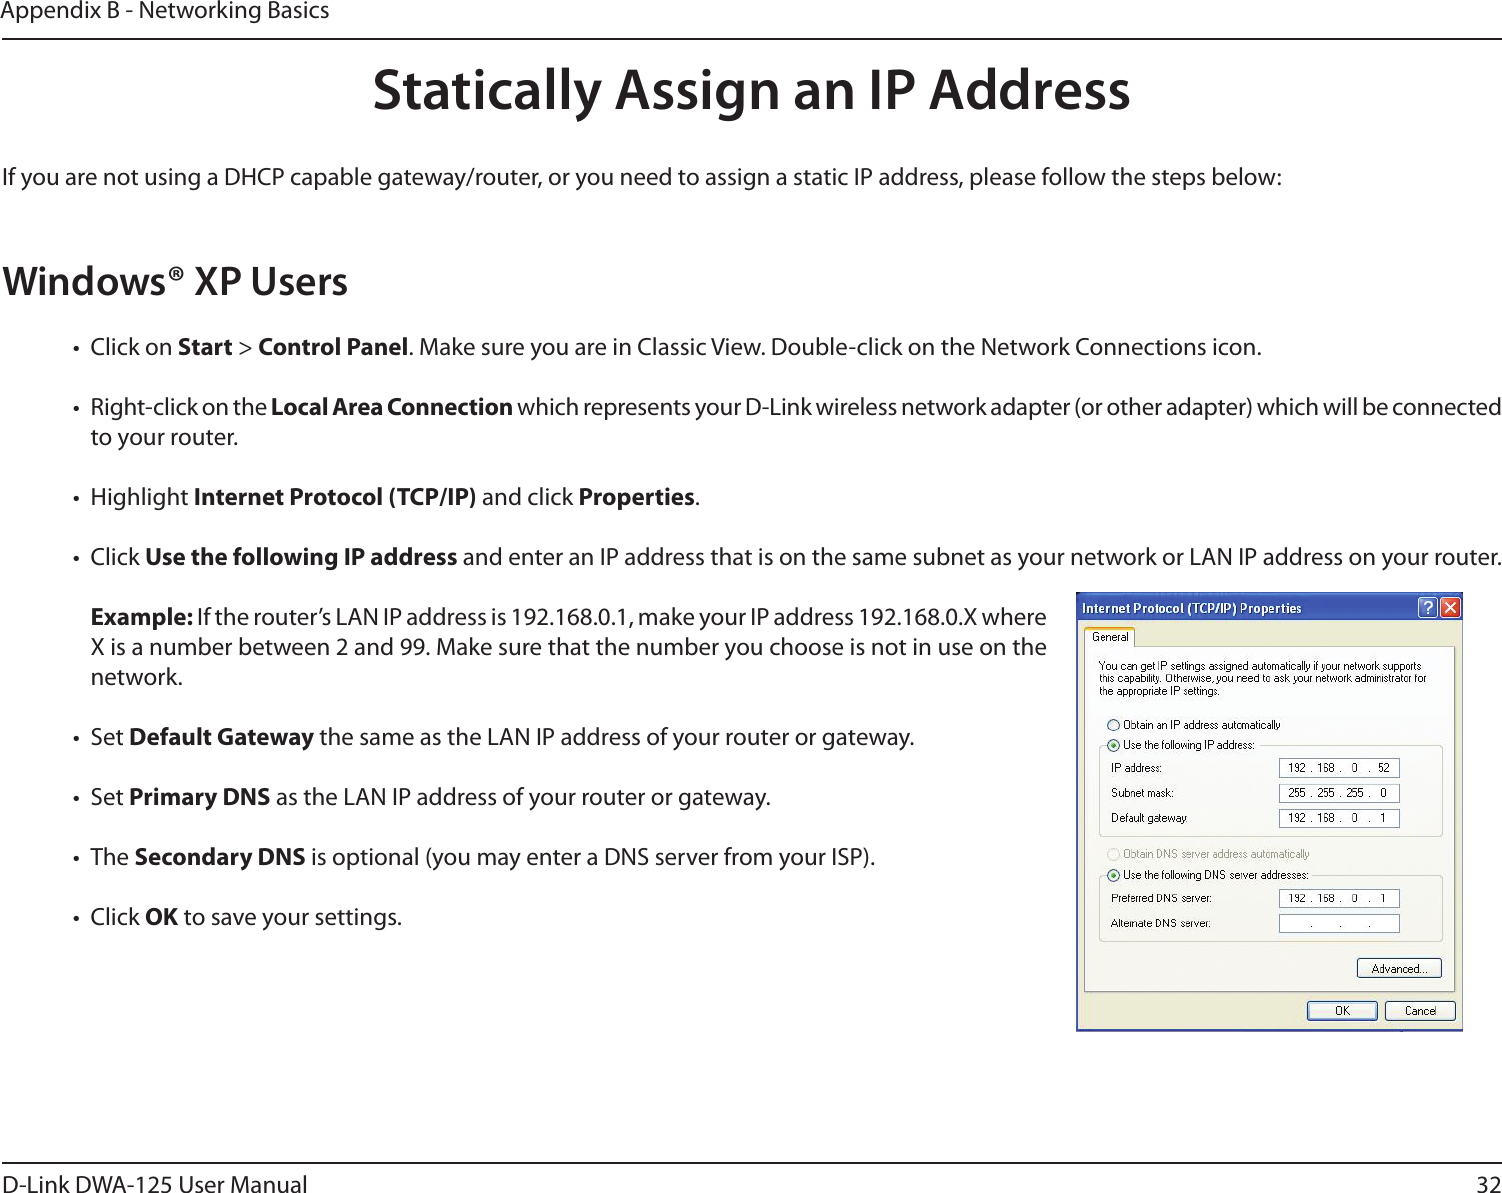 32D-Link DWA-125 User ManualAppendix B - Networking BasicsStatically Assign an IP AddressIf you are not using a DHCP capable gateway/router, or you need to assign a static IP address, please follow the steps below:Windows® XP Users•  Click on Start &gt; Control Panel. Make sure you are in Classic View. Double-click on the Network Connections icon. •  Right-click on the Local Area Connection which represents your D-Link wireless network adapter (or other adapter) which will be connected to your router.•  Highlight Internet Protocol (TCP/IP) and click Properties.•  Click Use the following IP address and enter an IP address that is on the same subnet as your network or LAN IP address on your router. Example: If the router’s LAN IP address is 192.168.0.1, make your IP address 192.168.0.X where X is a number between 2 and 99. Make sure that the number you choose is not in use on the network. •  Set Default Gateway the same as the LAN IP address of your router or gateway.•  Set Primary DNS as the LAN IP address of your router or gateway. •  The Secondary DNS is optional (you may enter a DNS server from your ISP).•  Click OK to save your settings.